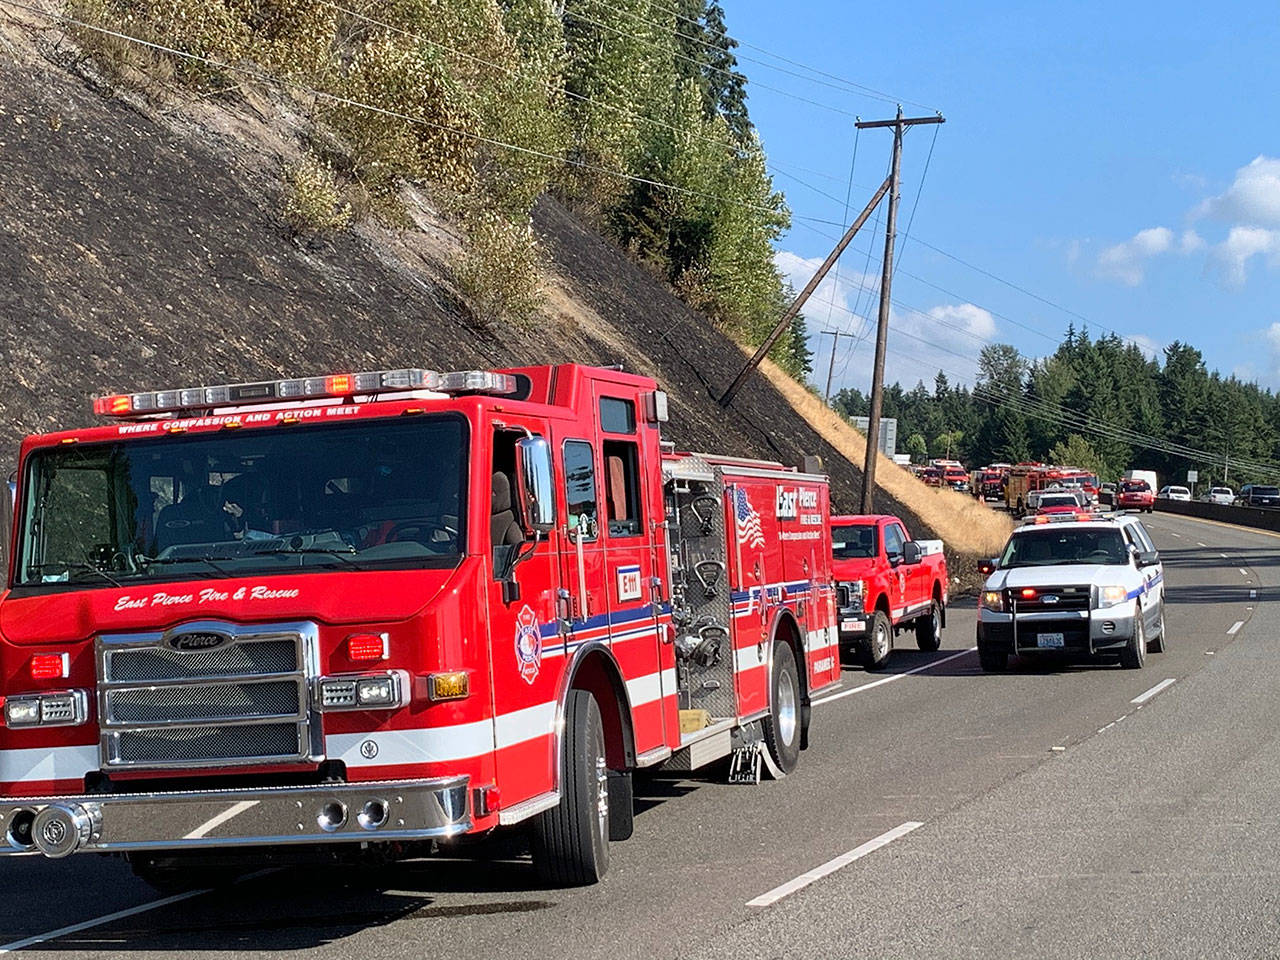 More than 50 first responders, including a regional Strike Team that consists of aid from the Enumclaw Fire Department, aided in putting out a brush fire in Bonney Lake. Photo courtesy East Pierce Fire and Rescue